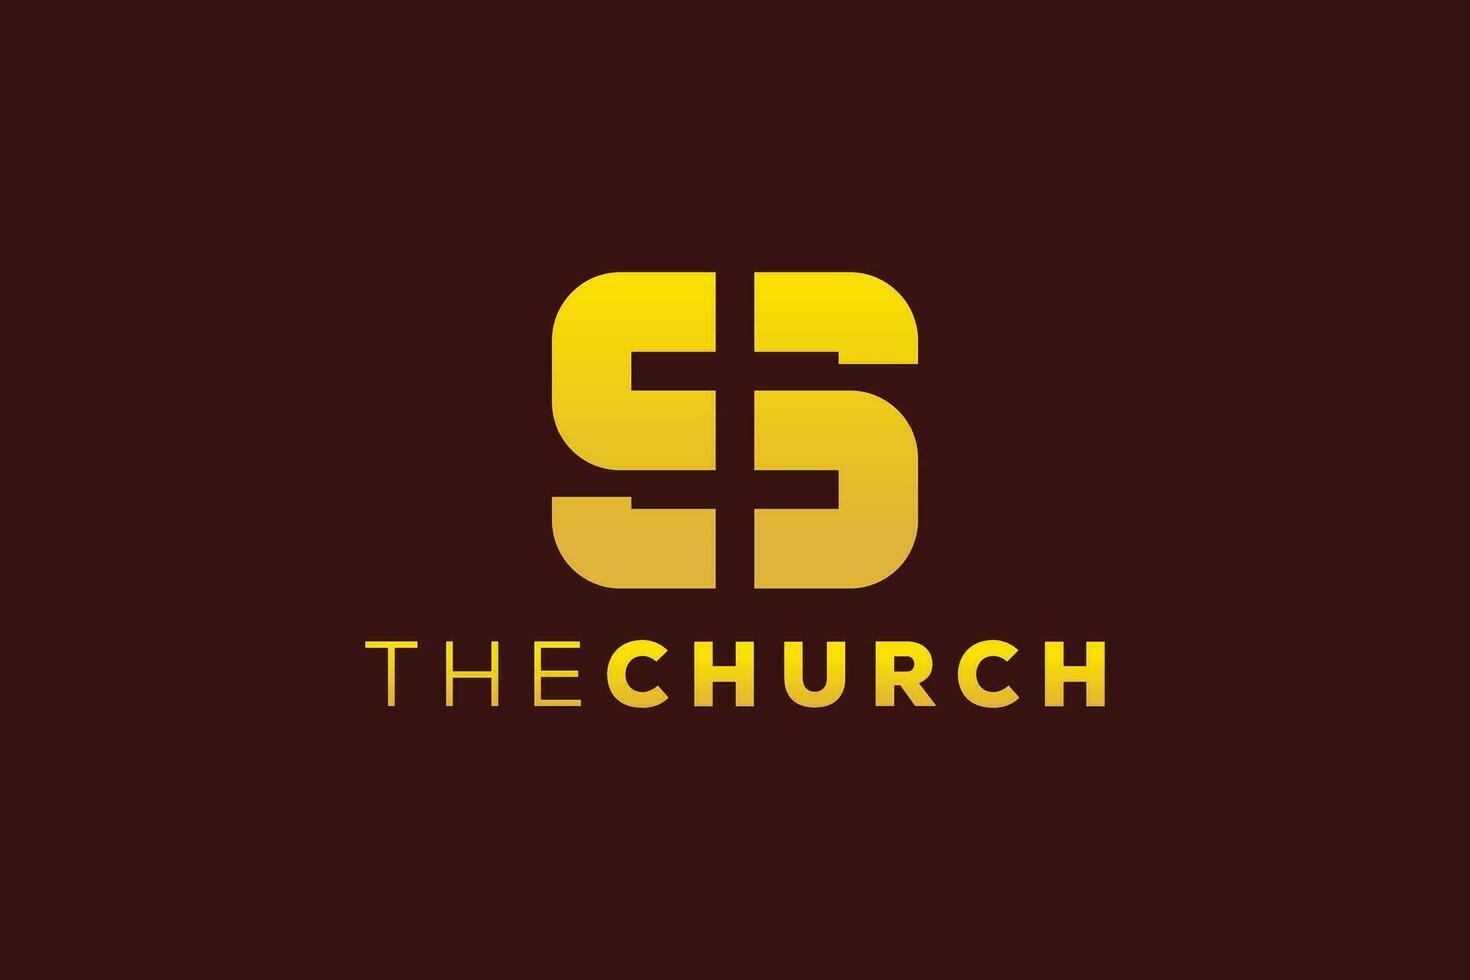 Trendy and Professional letter S church sign Christian and peaceful vector logo design template